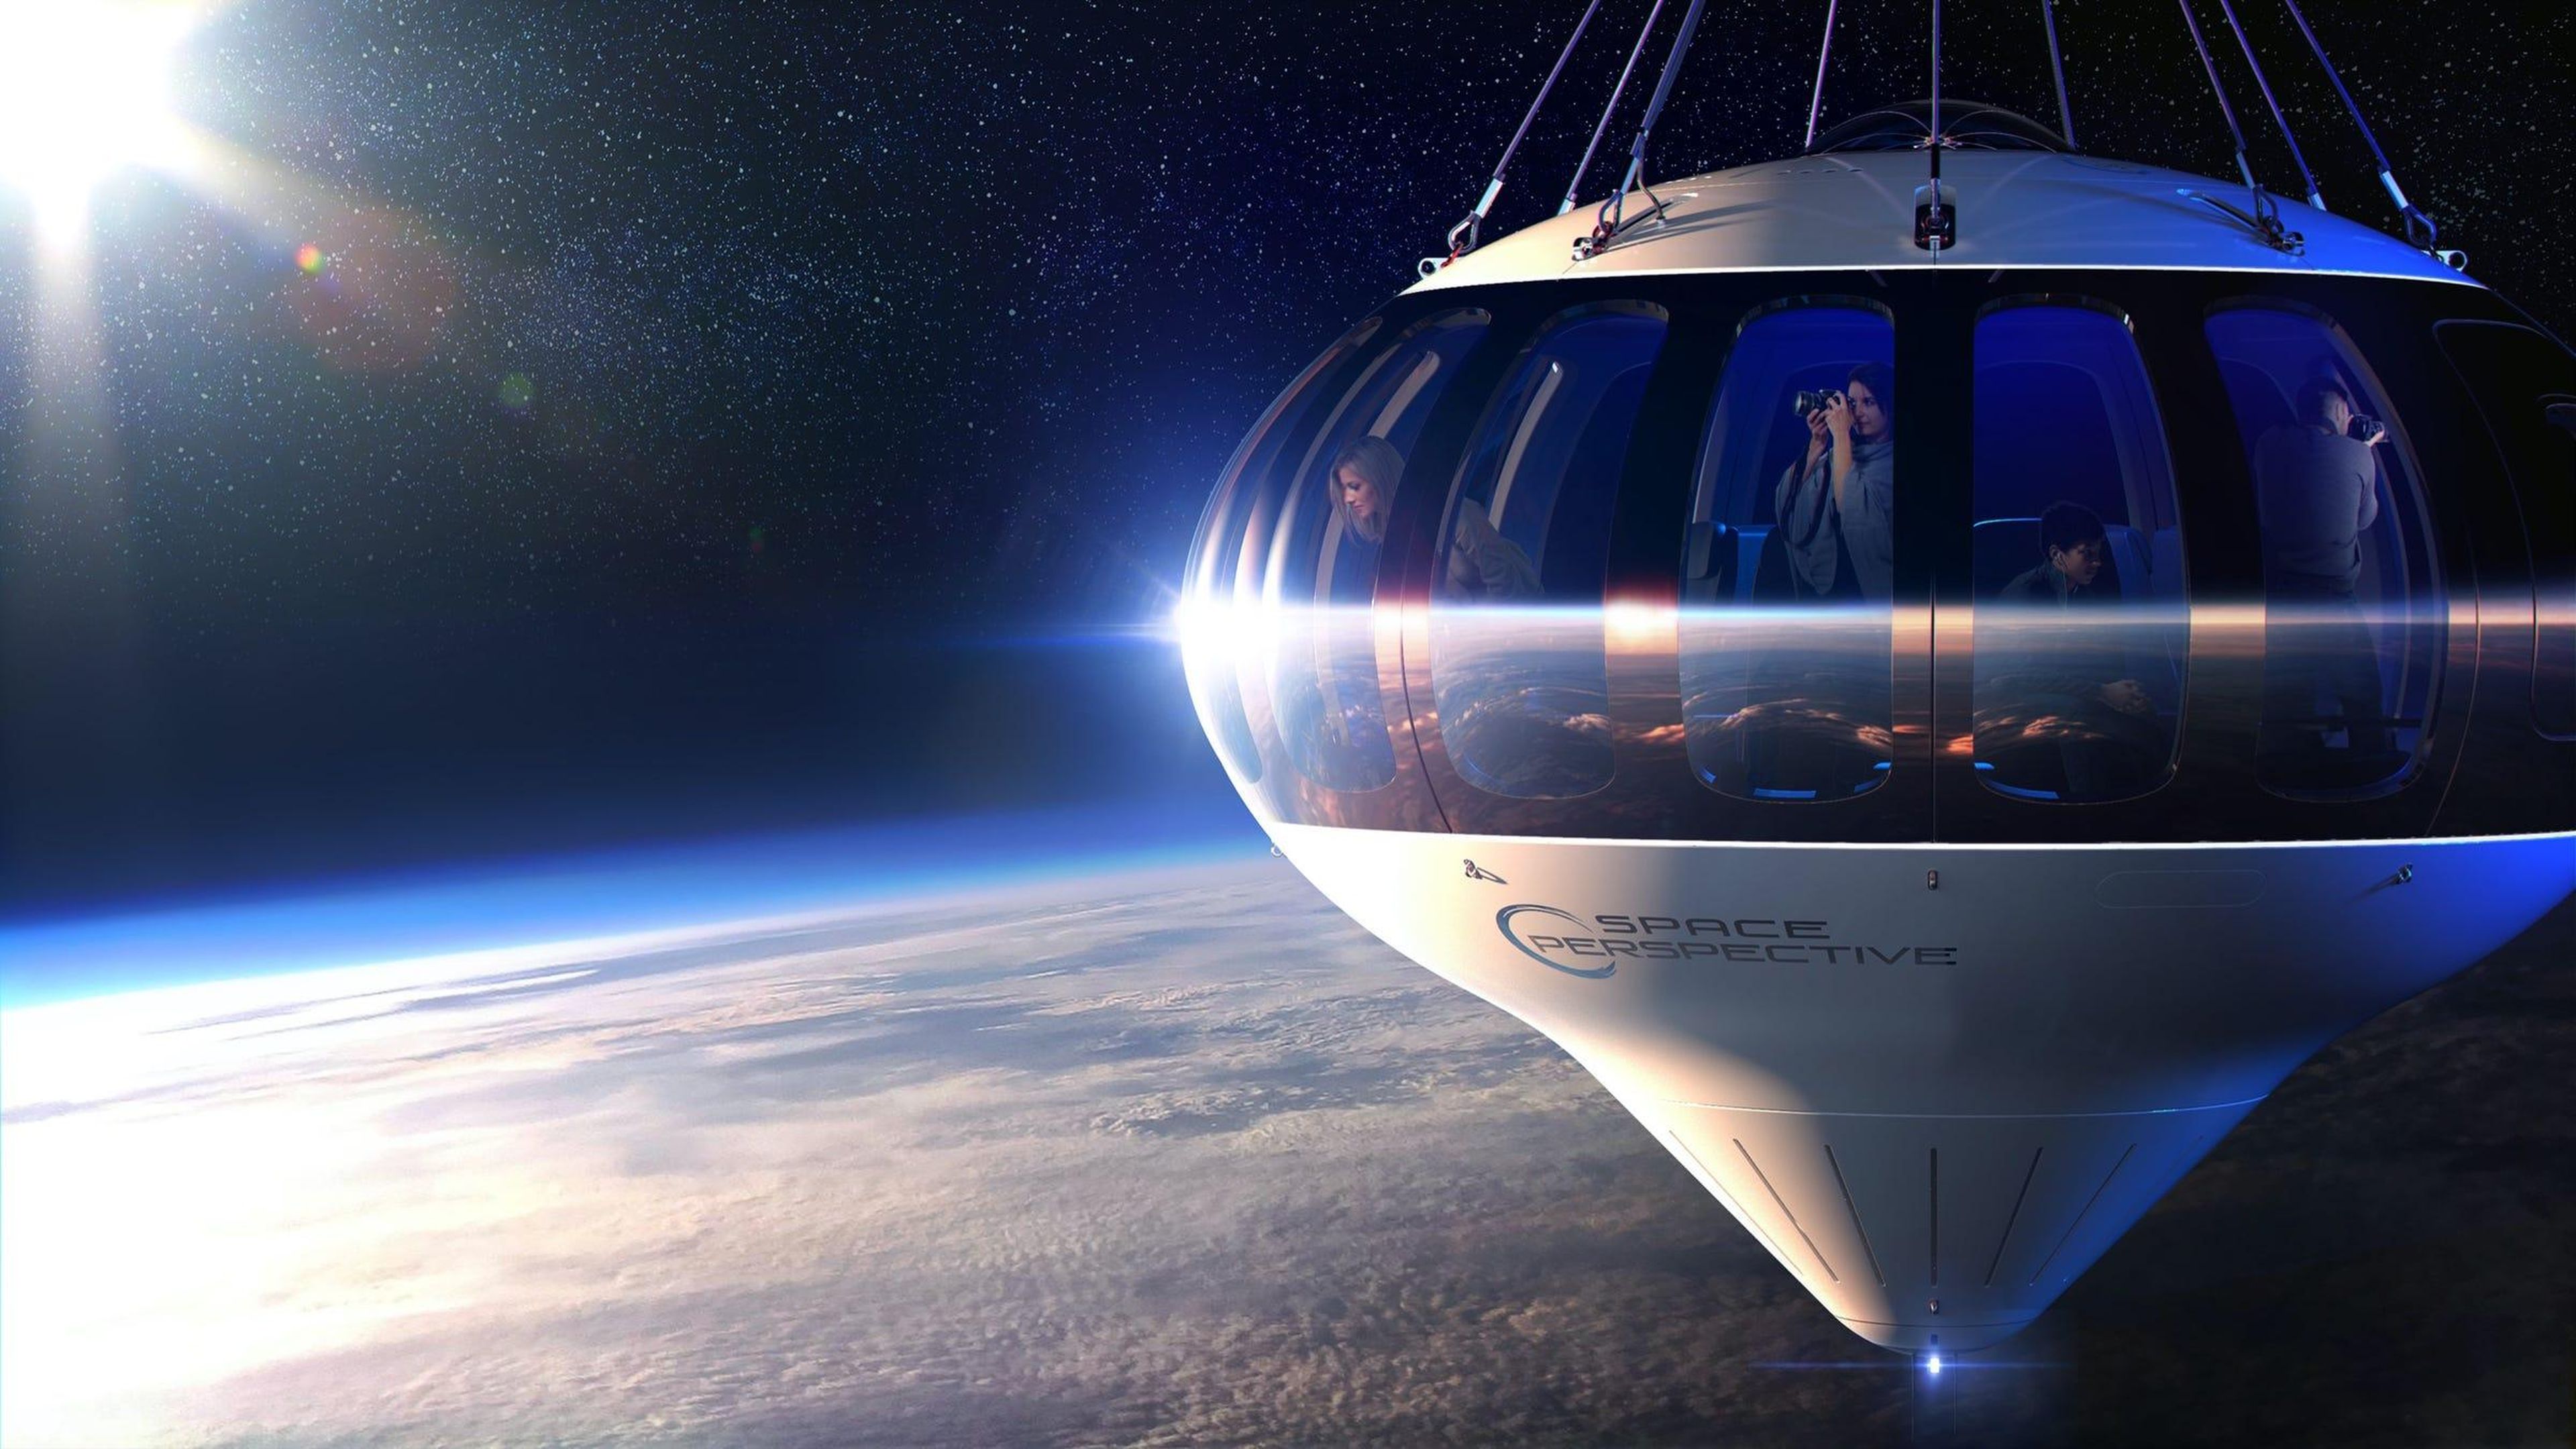 An illustration of Space Perspective's planned crew capsule, the Neptune, dangling from the end of a stratospheric balloon with eight passengers and a pilot inside. Space Perspective